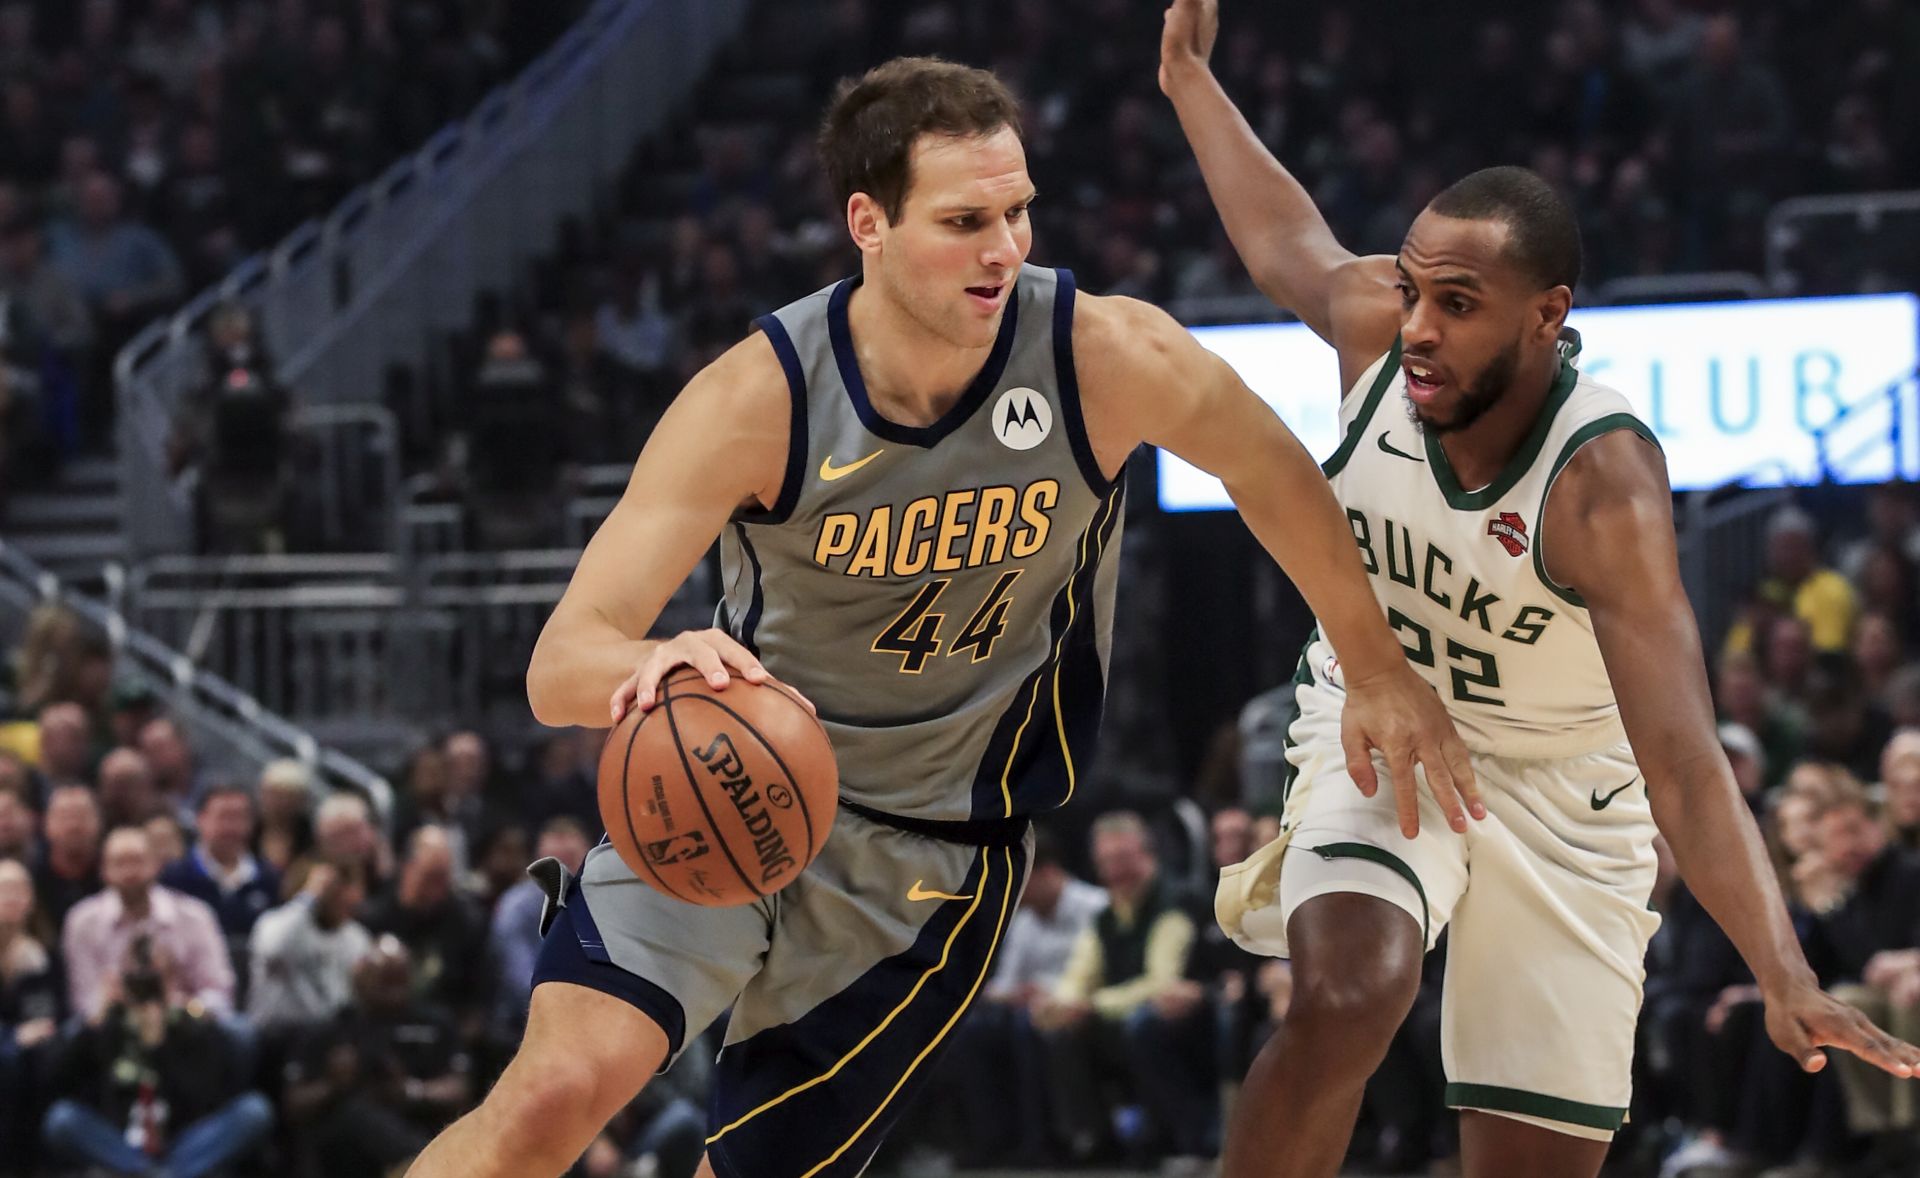 epa07421200 Indiana Pacers forward Bojan Bogdanovic of Croatia (L) drives around Milwaukee Bucks forward Khris Middleton (R) during the NBA game between the Indiana Pacers and the Milwaukee Bucks at Fiserv Forum in Milwaukee, Wisconsin, USA, 07 March 2019.  EPA/TANNEN MAURY  SHUTTERSTOCK OUT